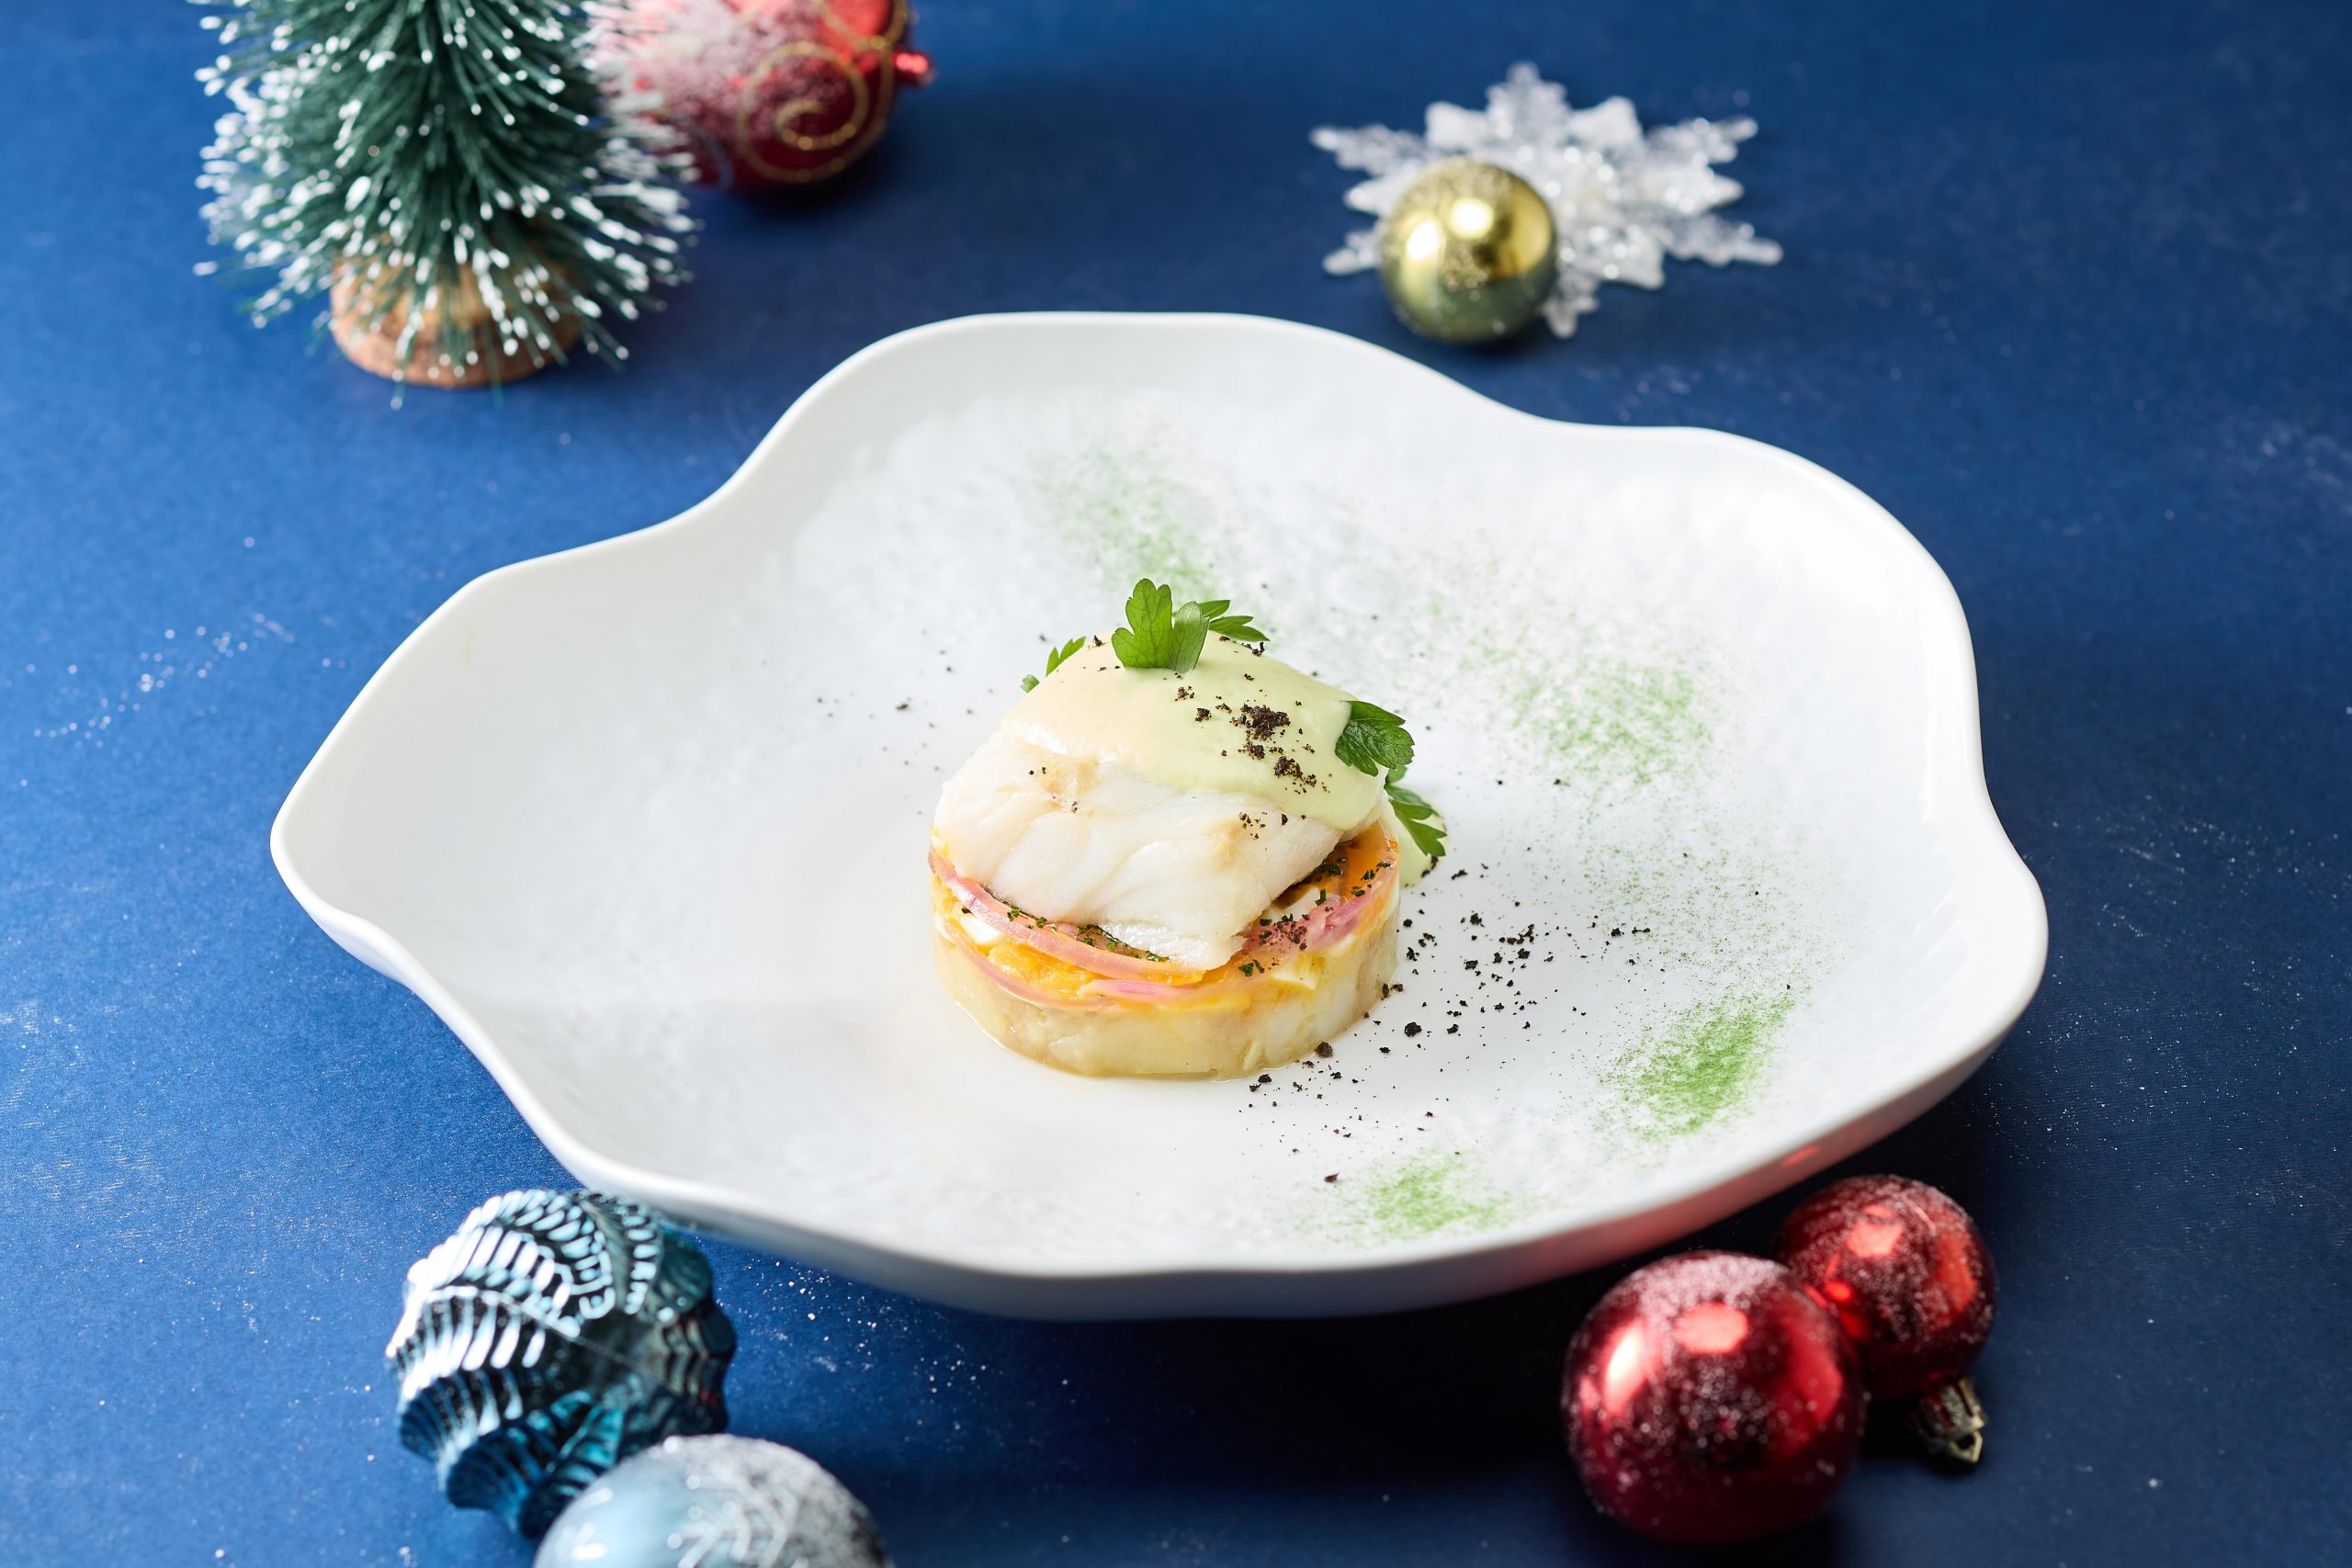 Nicknamed fiel amigo, meaning “loyal friend”, salted cod dishes steal the show on Christmas Eve in Portugal